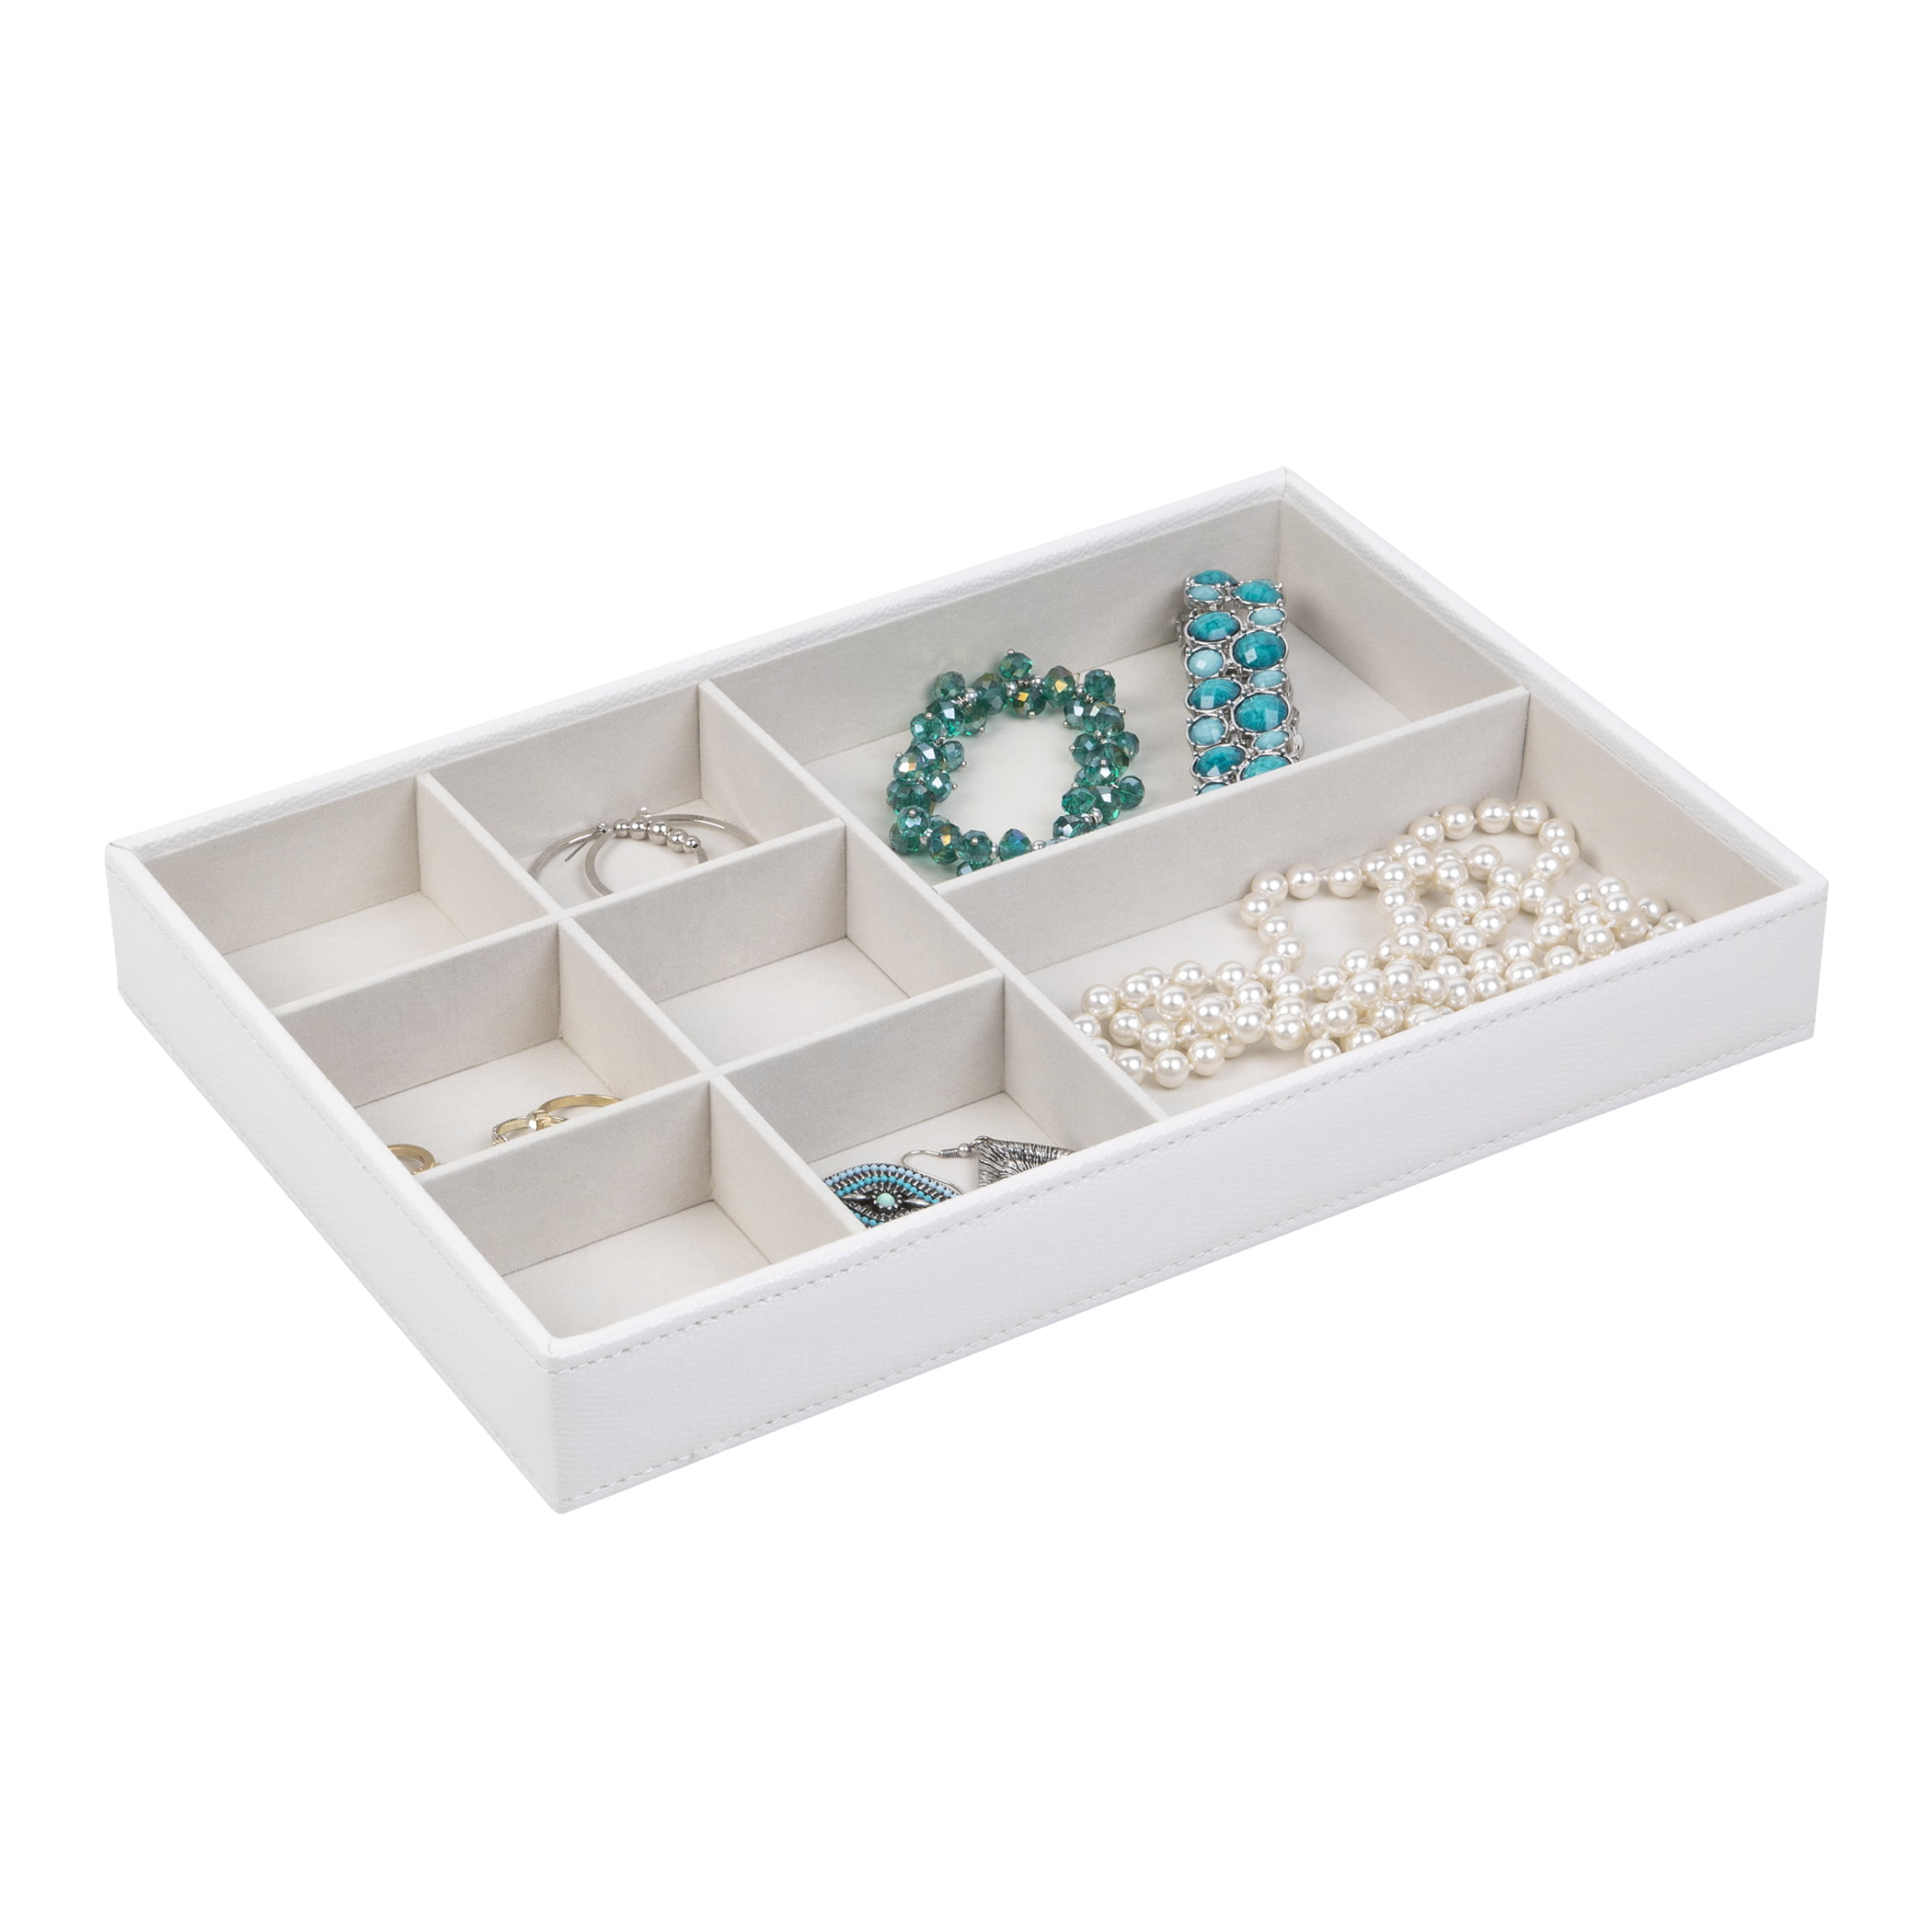 Richards Homewares Tray with Ring 8 Compartment-Champagne Bracelets 12 x 8 x 1.6, Holder for Earrings Display and Storage Necklaces & All Kinds of jewelries 